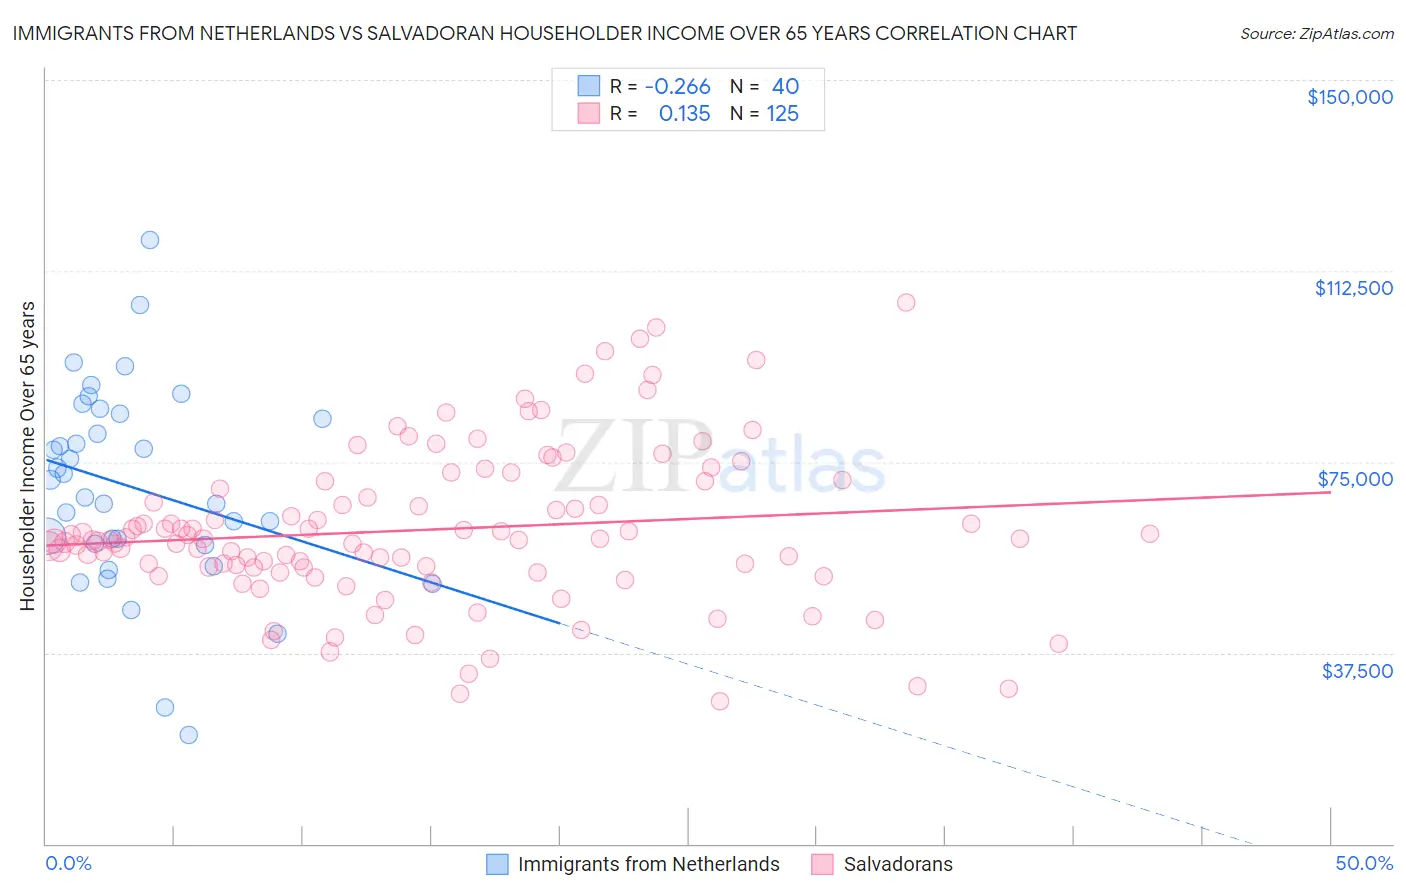 Immigrants from Netherlands vs Salvadoran Householder Income Over 65 years